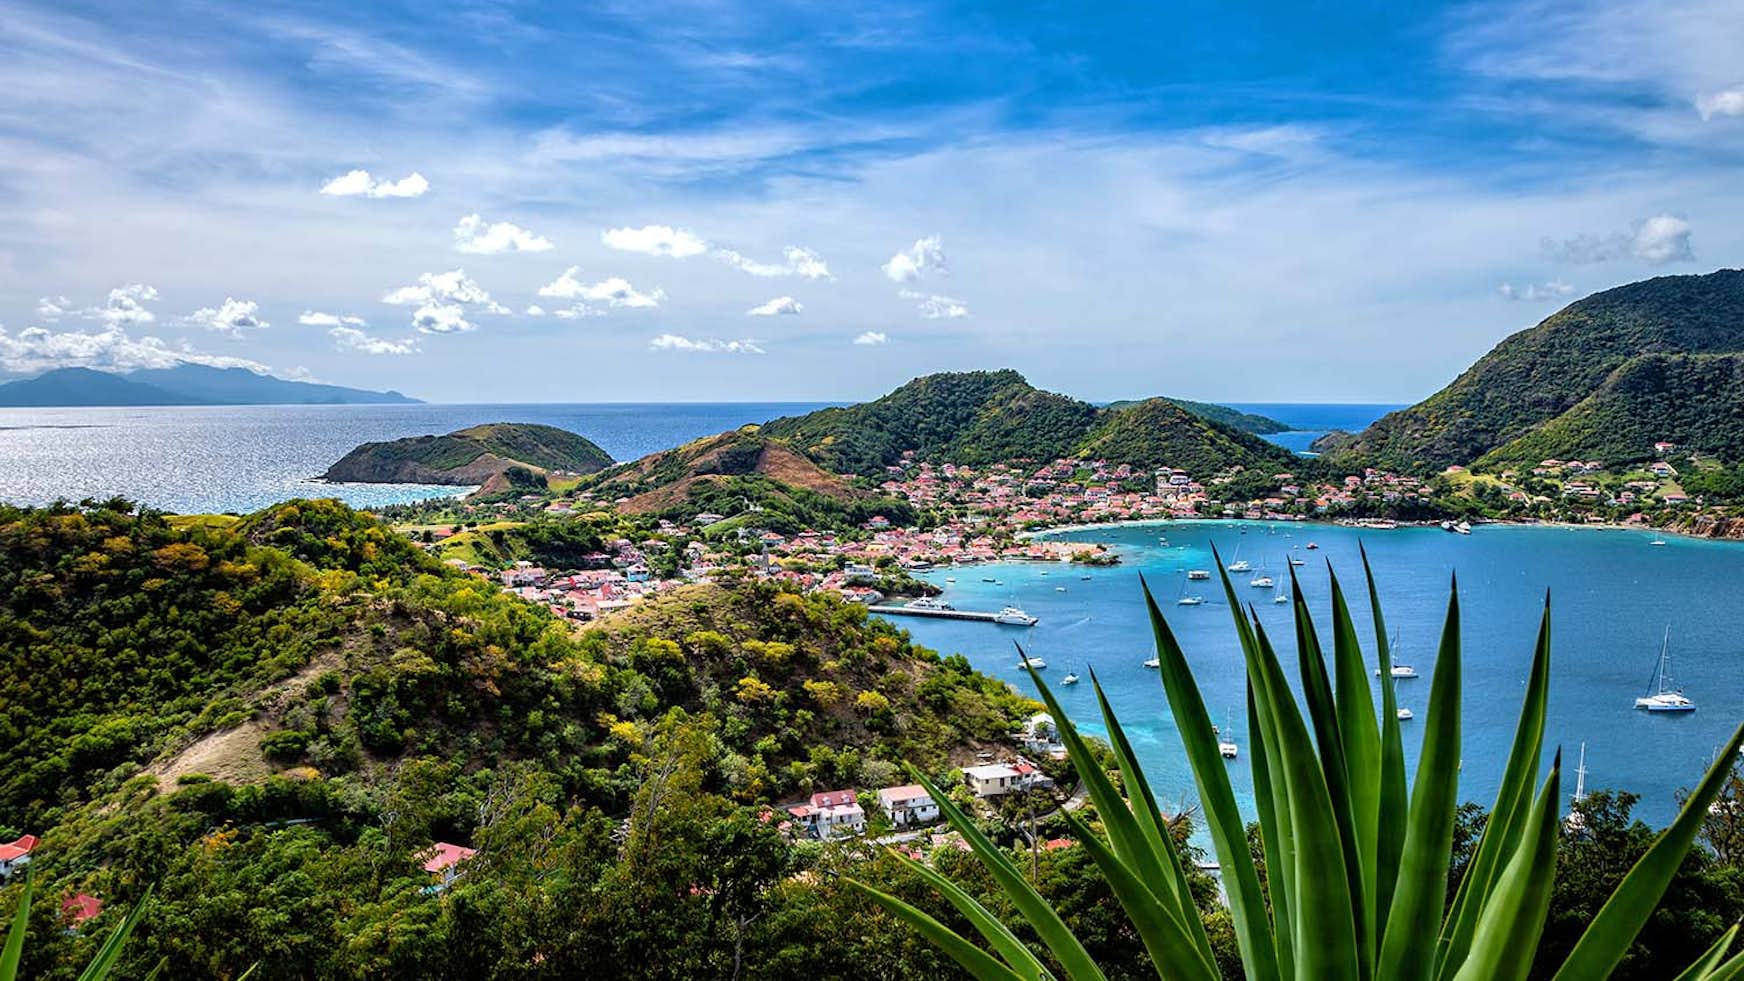 scenic image of Guadeloupe, lush greenery backed by turquoise waters and yachts at anchor, idyllic Caribbean destination